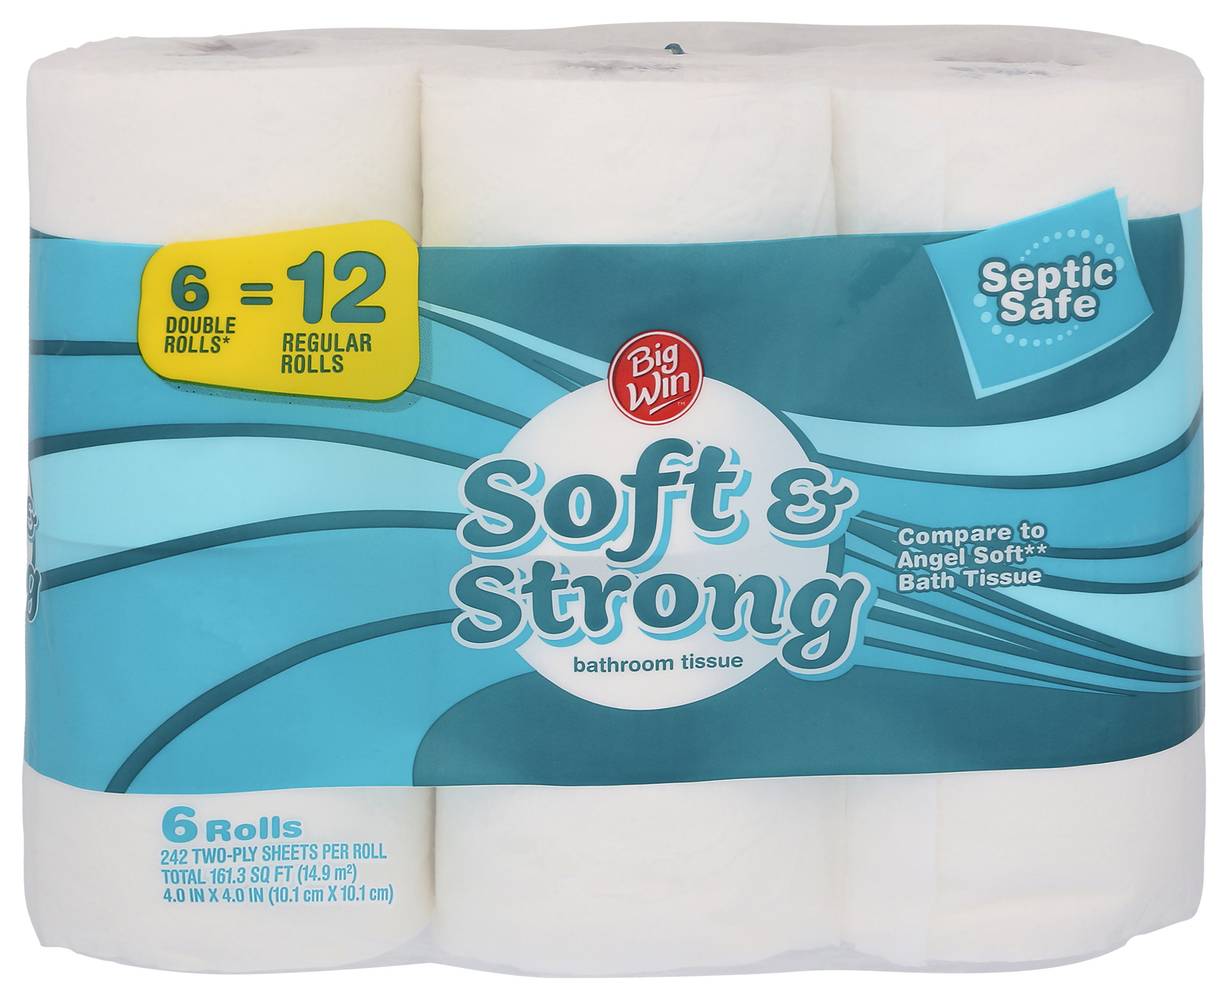 Big Win Soft & Strong Bathroom Tissue (4.0 in x 4.0 in)